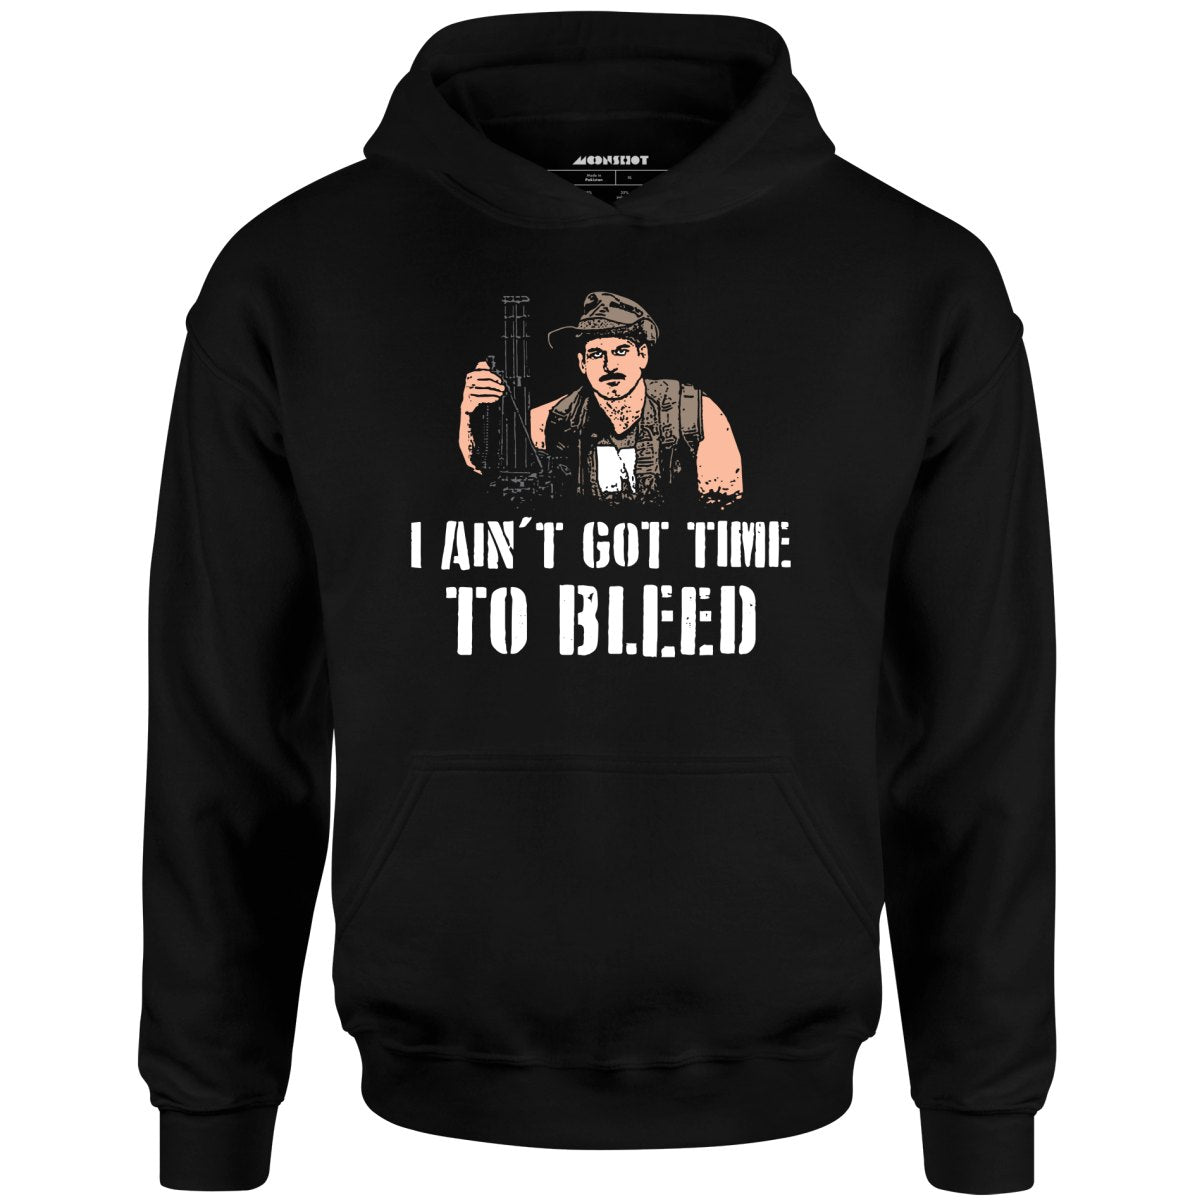 I Ain't Got Time to Bleed - Unisex Hoodie